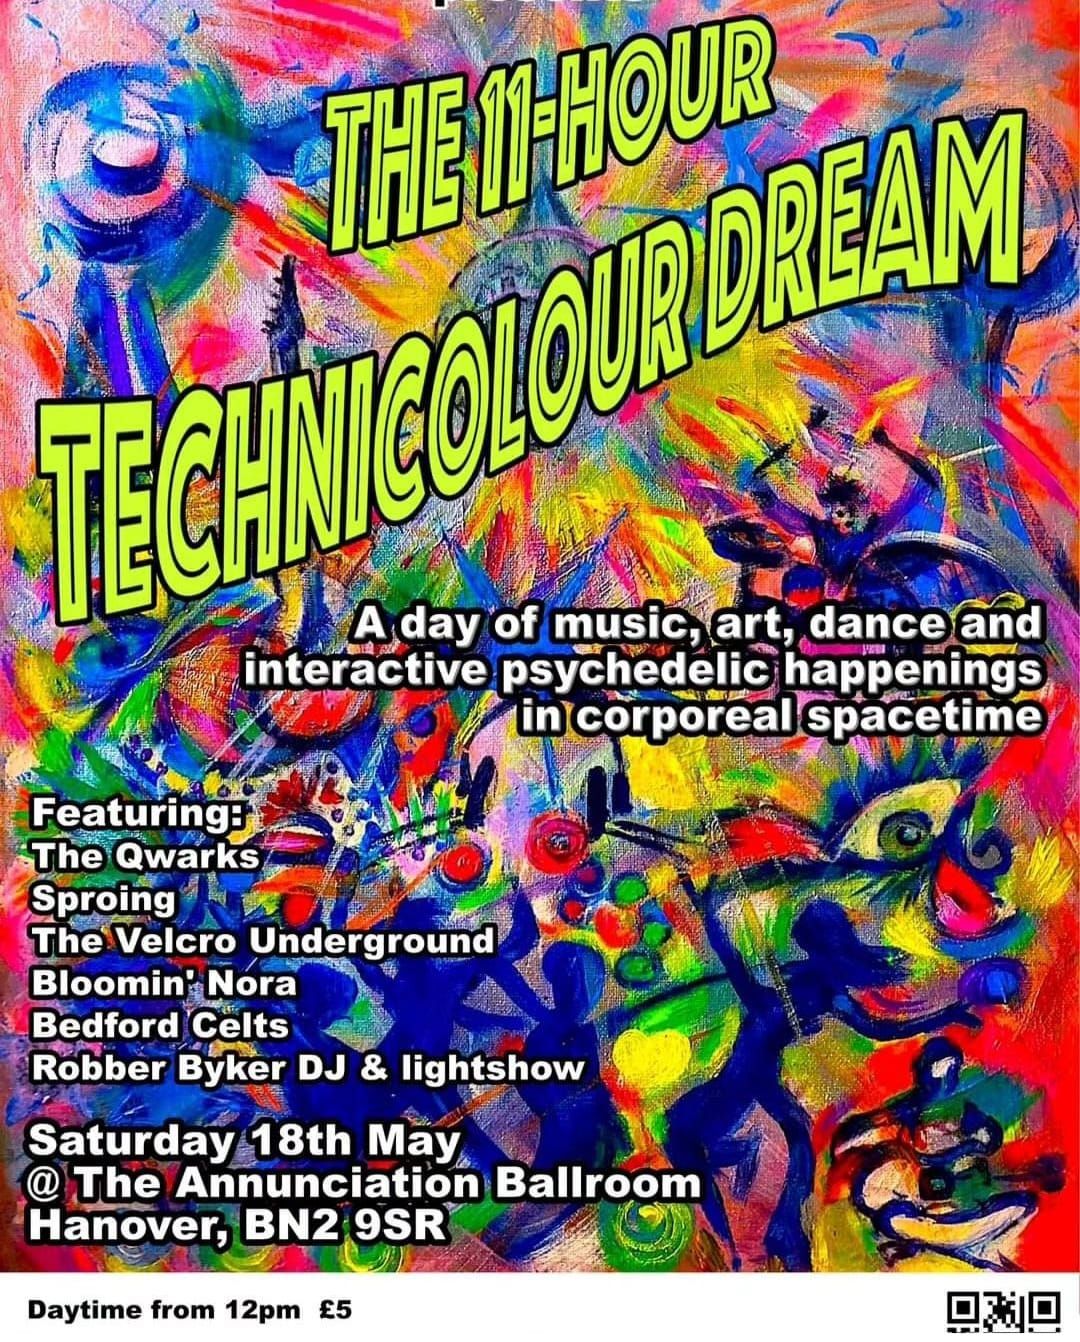 HANOVER PSYCHEDELIC CLUB PRESENTS TECHNICOLOUR HOURS OF EMERGENT HAPPENINGS